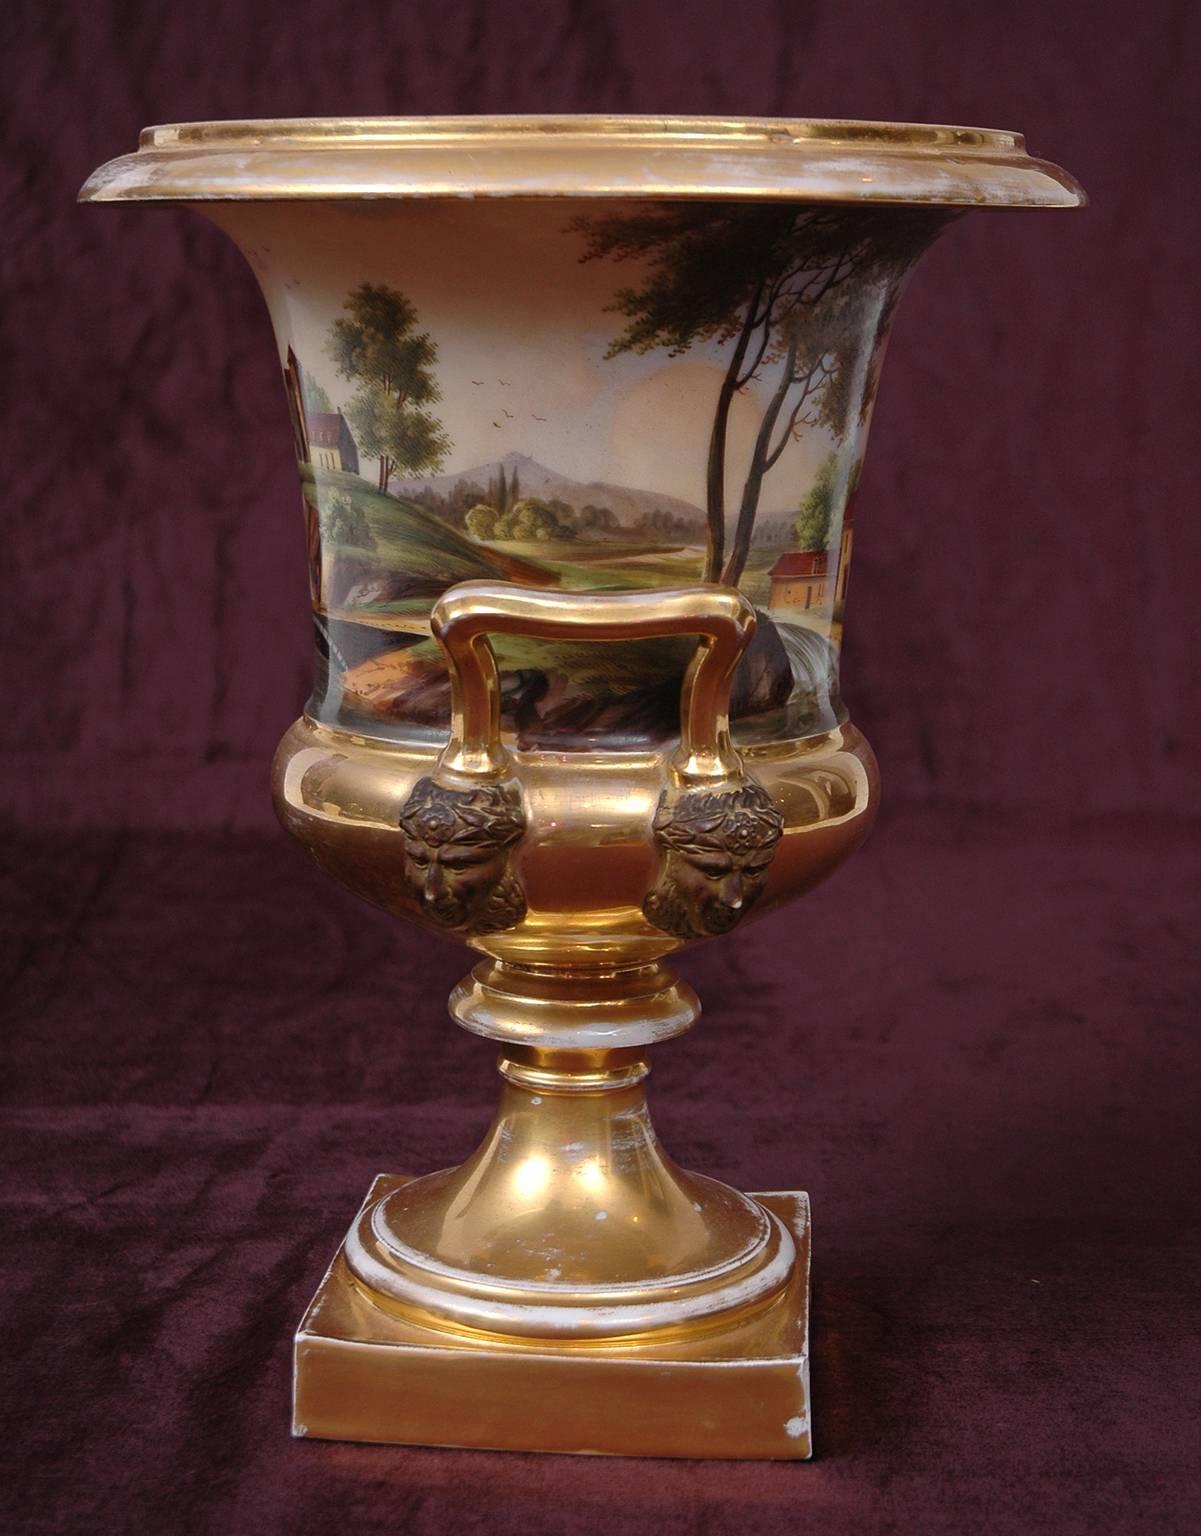 A large campagna urn with beautifully painted country scenes (possibly of chateaux in Arces, France). Sculpted figureheads adorn inverted handles, with gilding on rim, handles, pedestal and square base, France, circa 1820.

Measures: 10.25